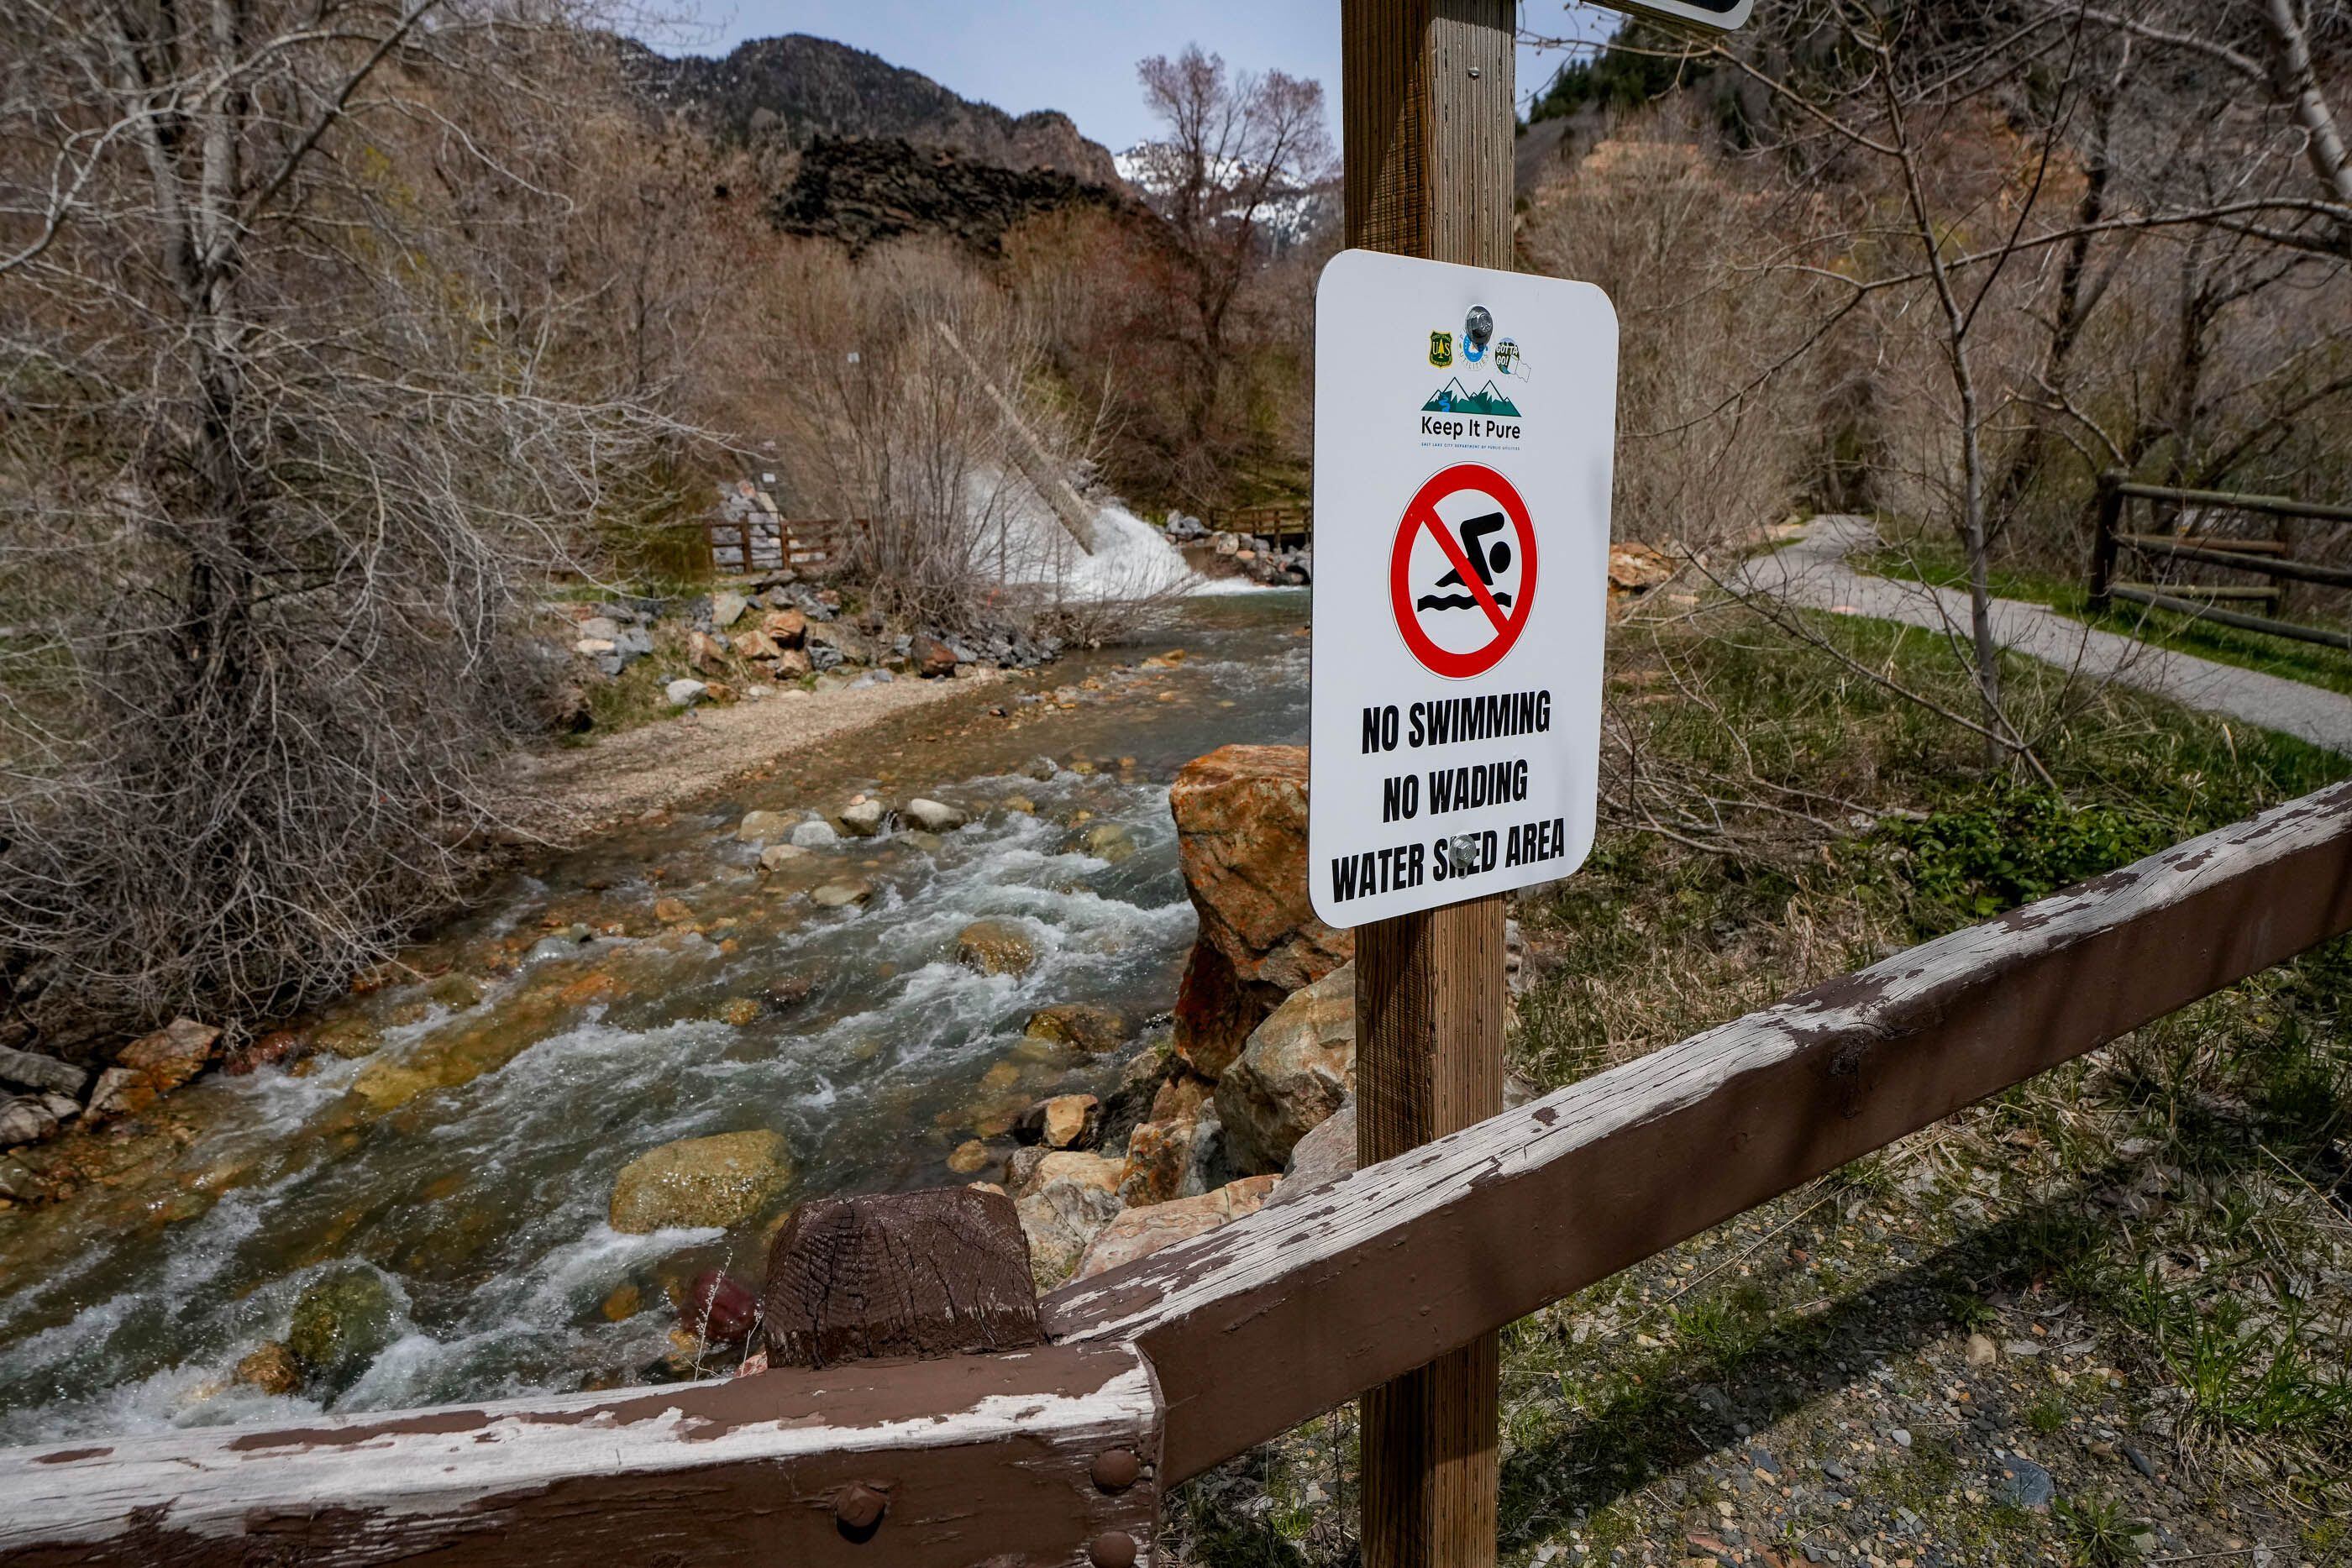 (Francisco Kjolseth  |  The Salt Lake Tribune)  A no swimming or wading sign stands next to Big Cottonwood Creek at the Storm Mountain Picnic Area.